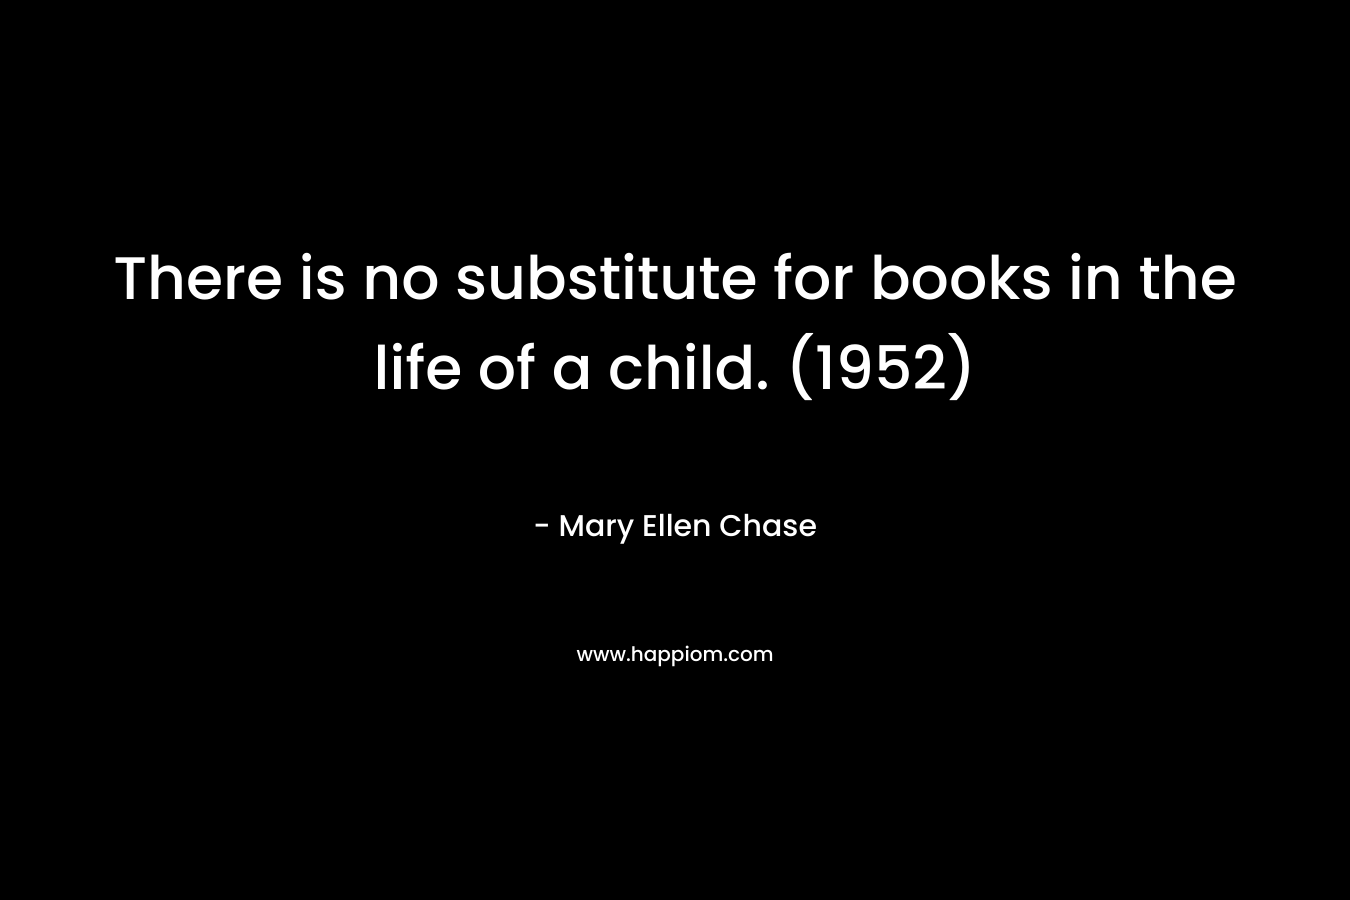 There is no substitute for books in the life of a child. (1952)